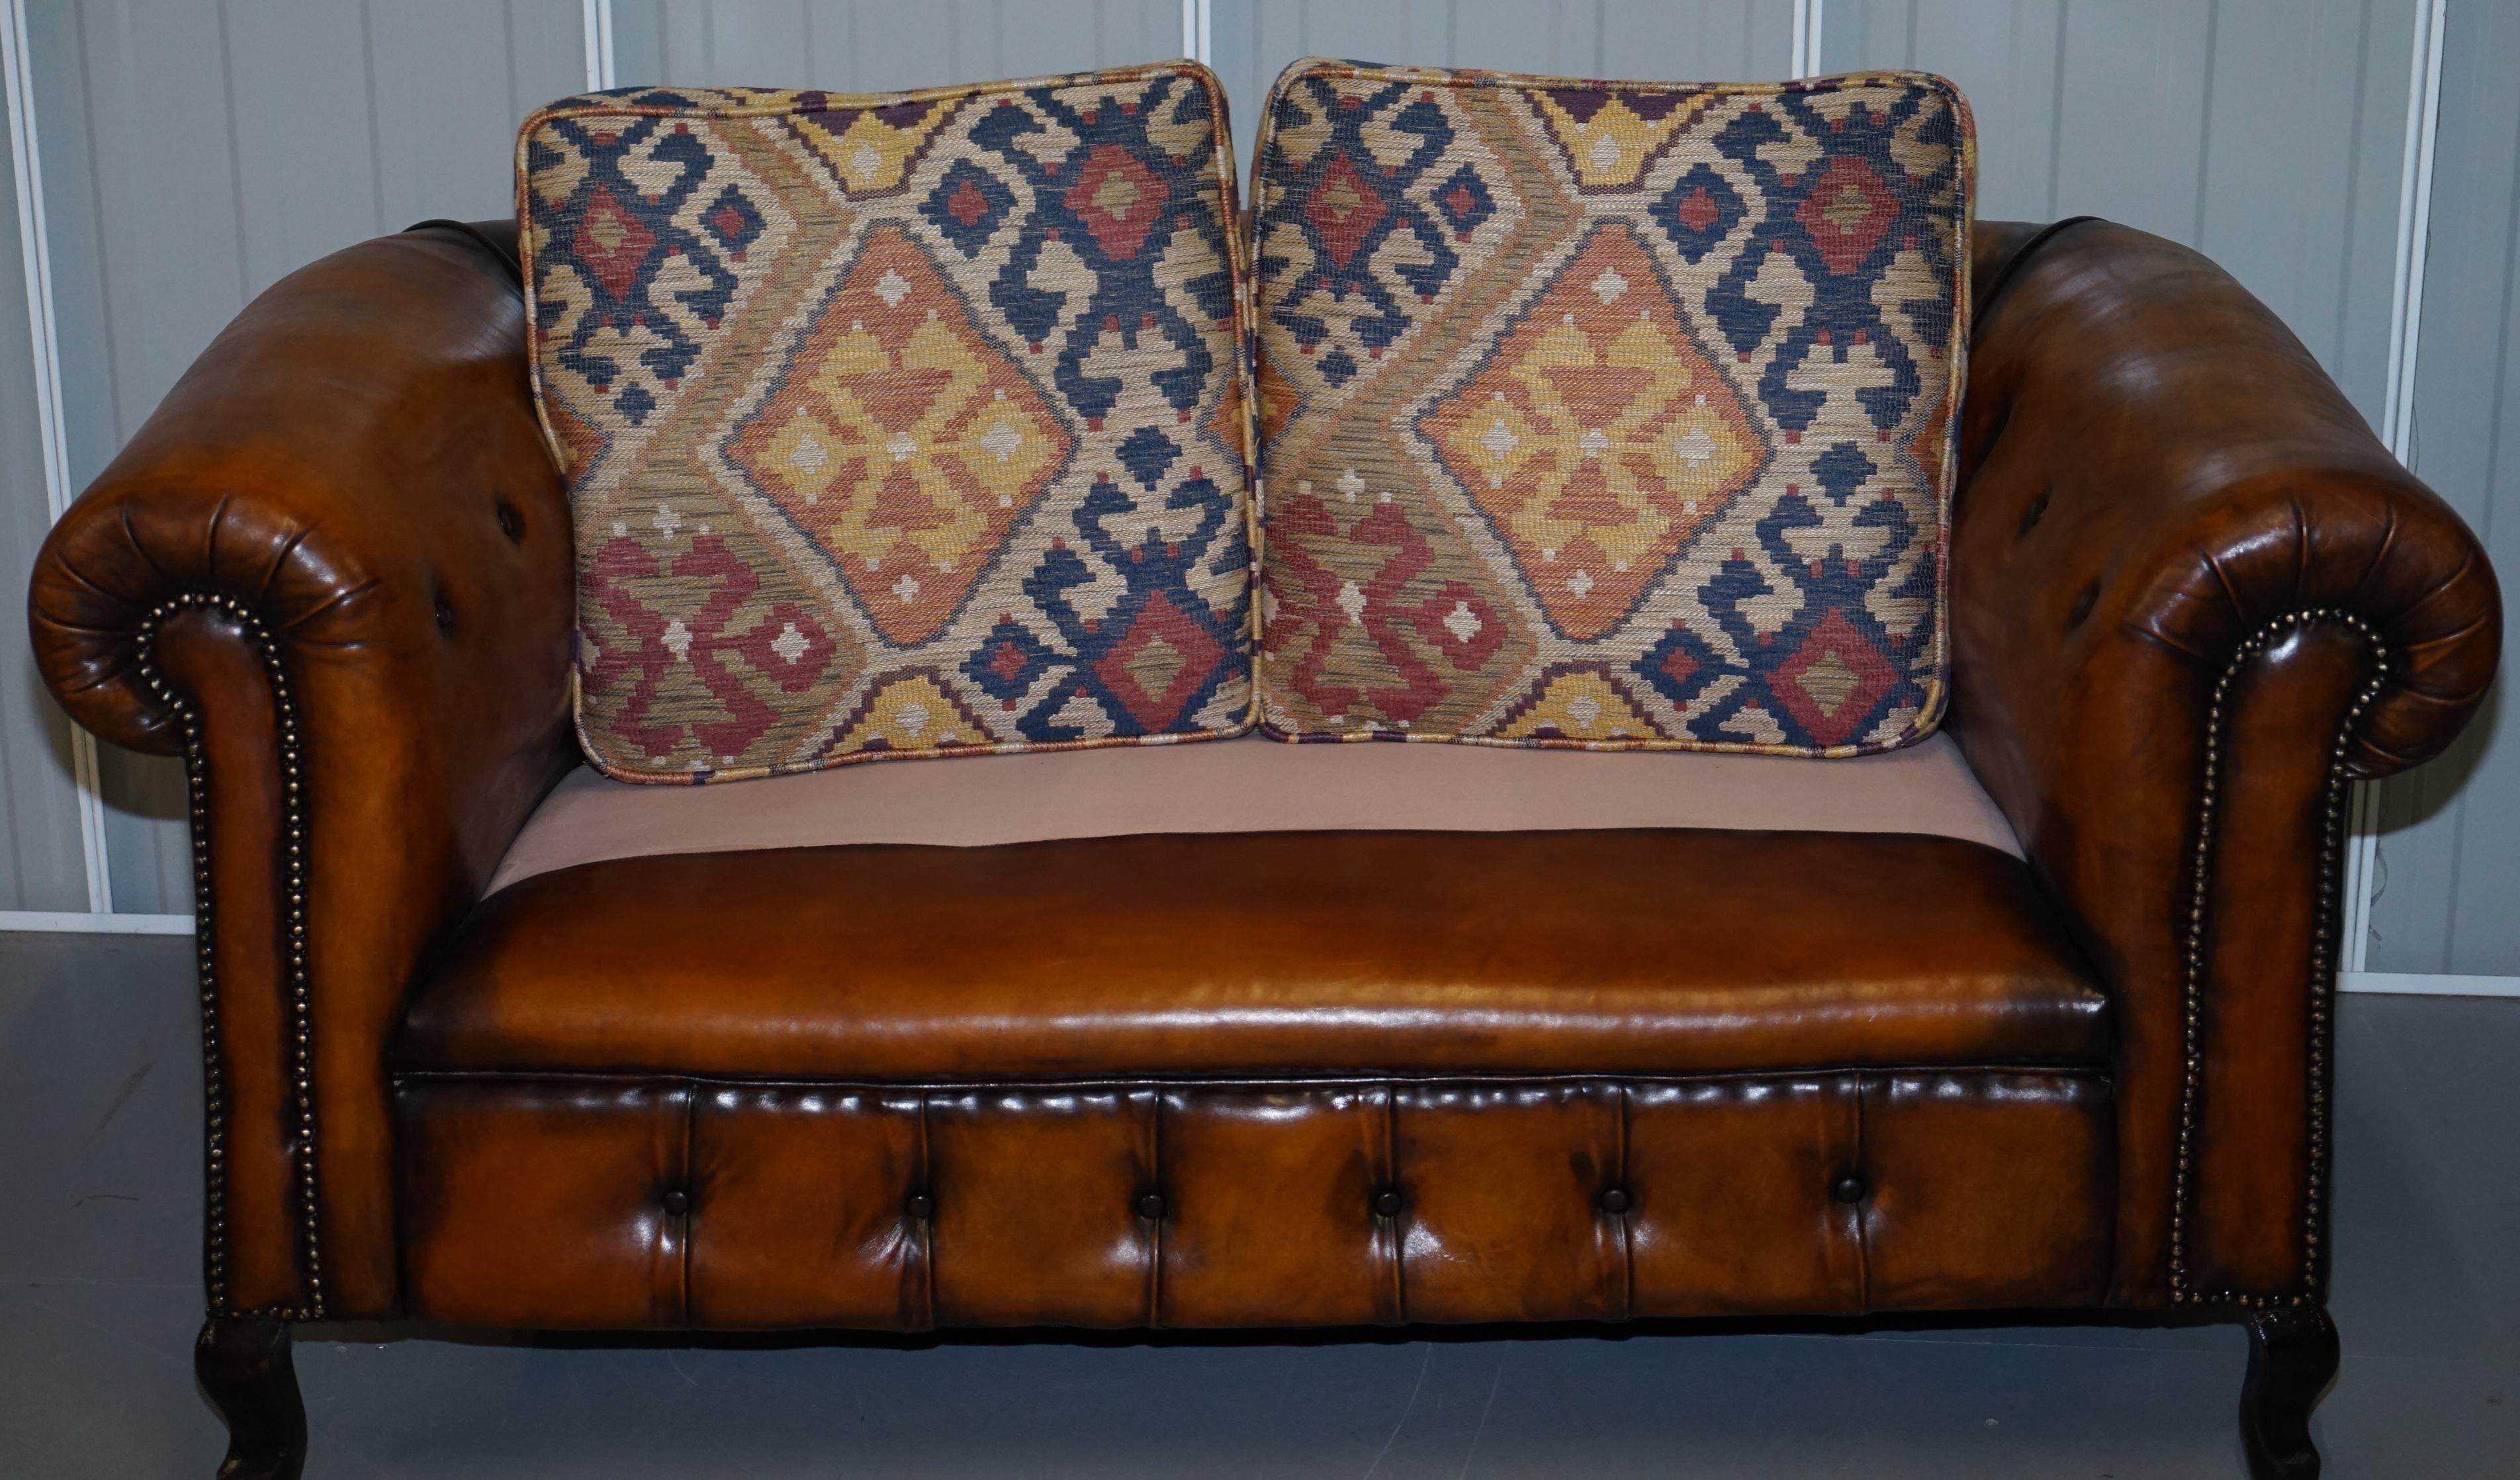 1 of 2 Restored Victorian Gentleman's Club Chesterfield Leather Sofas Kilim Seat For Sale 10